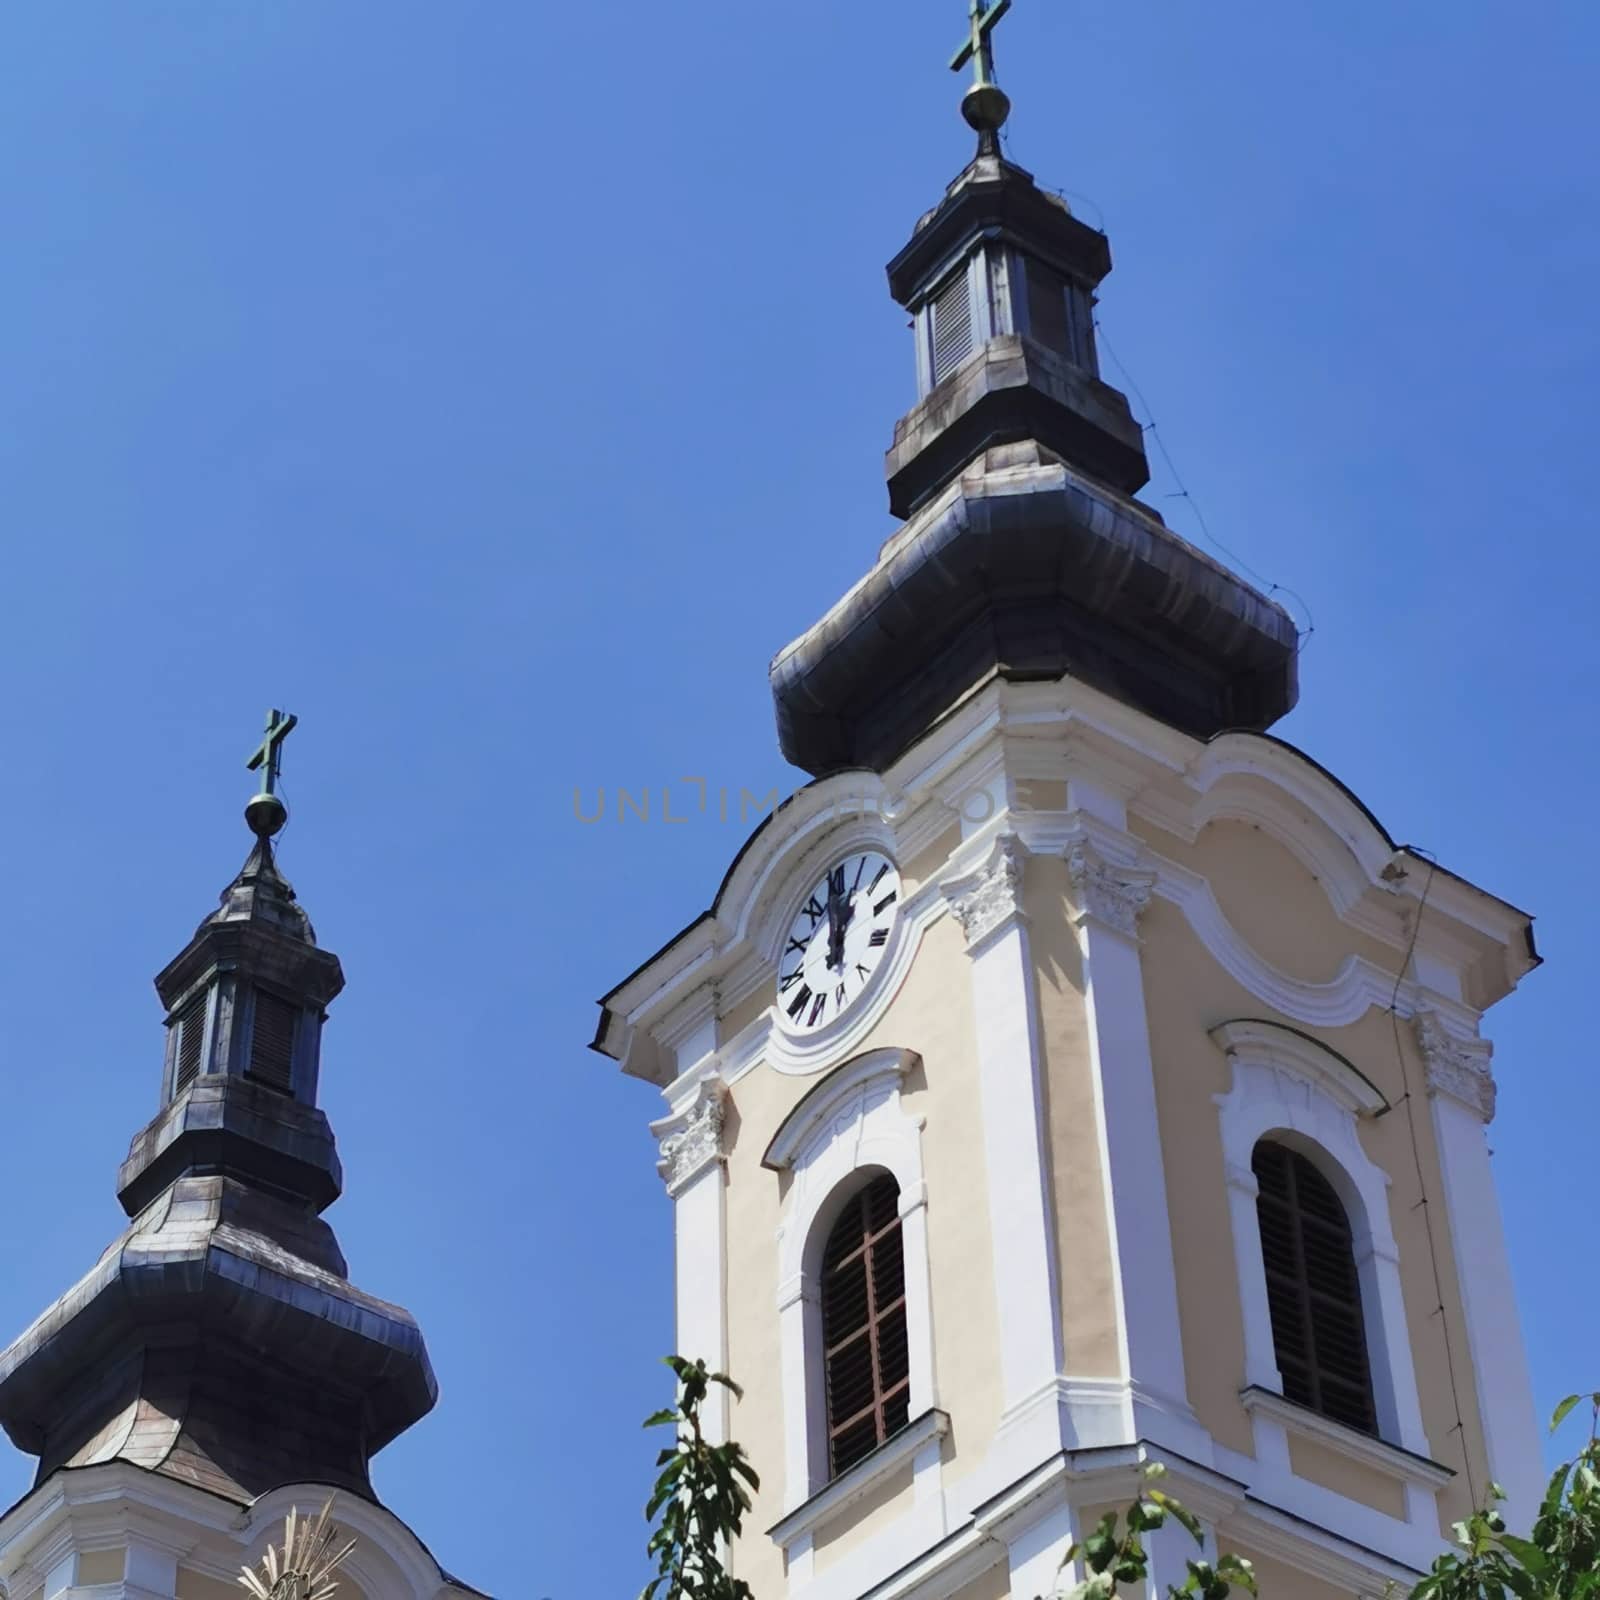 The church in Miskolc is close up with the beautiful large number plate clock by balage941